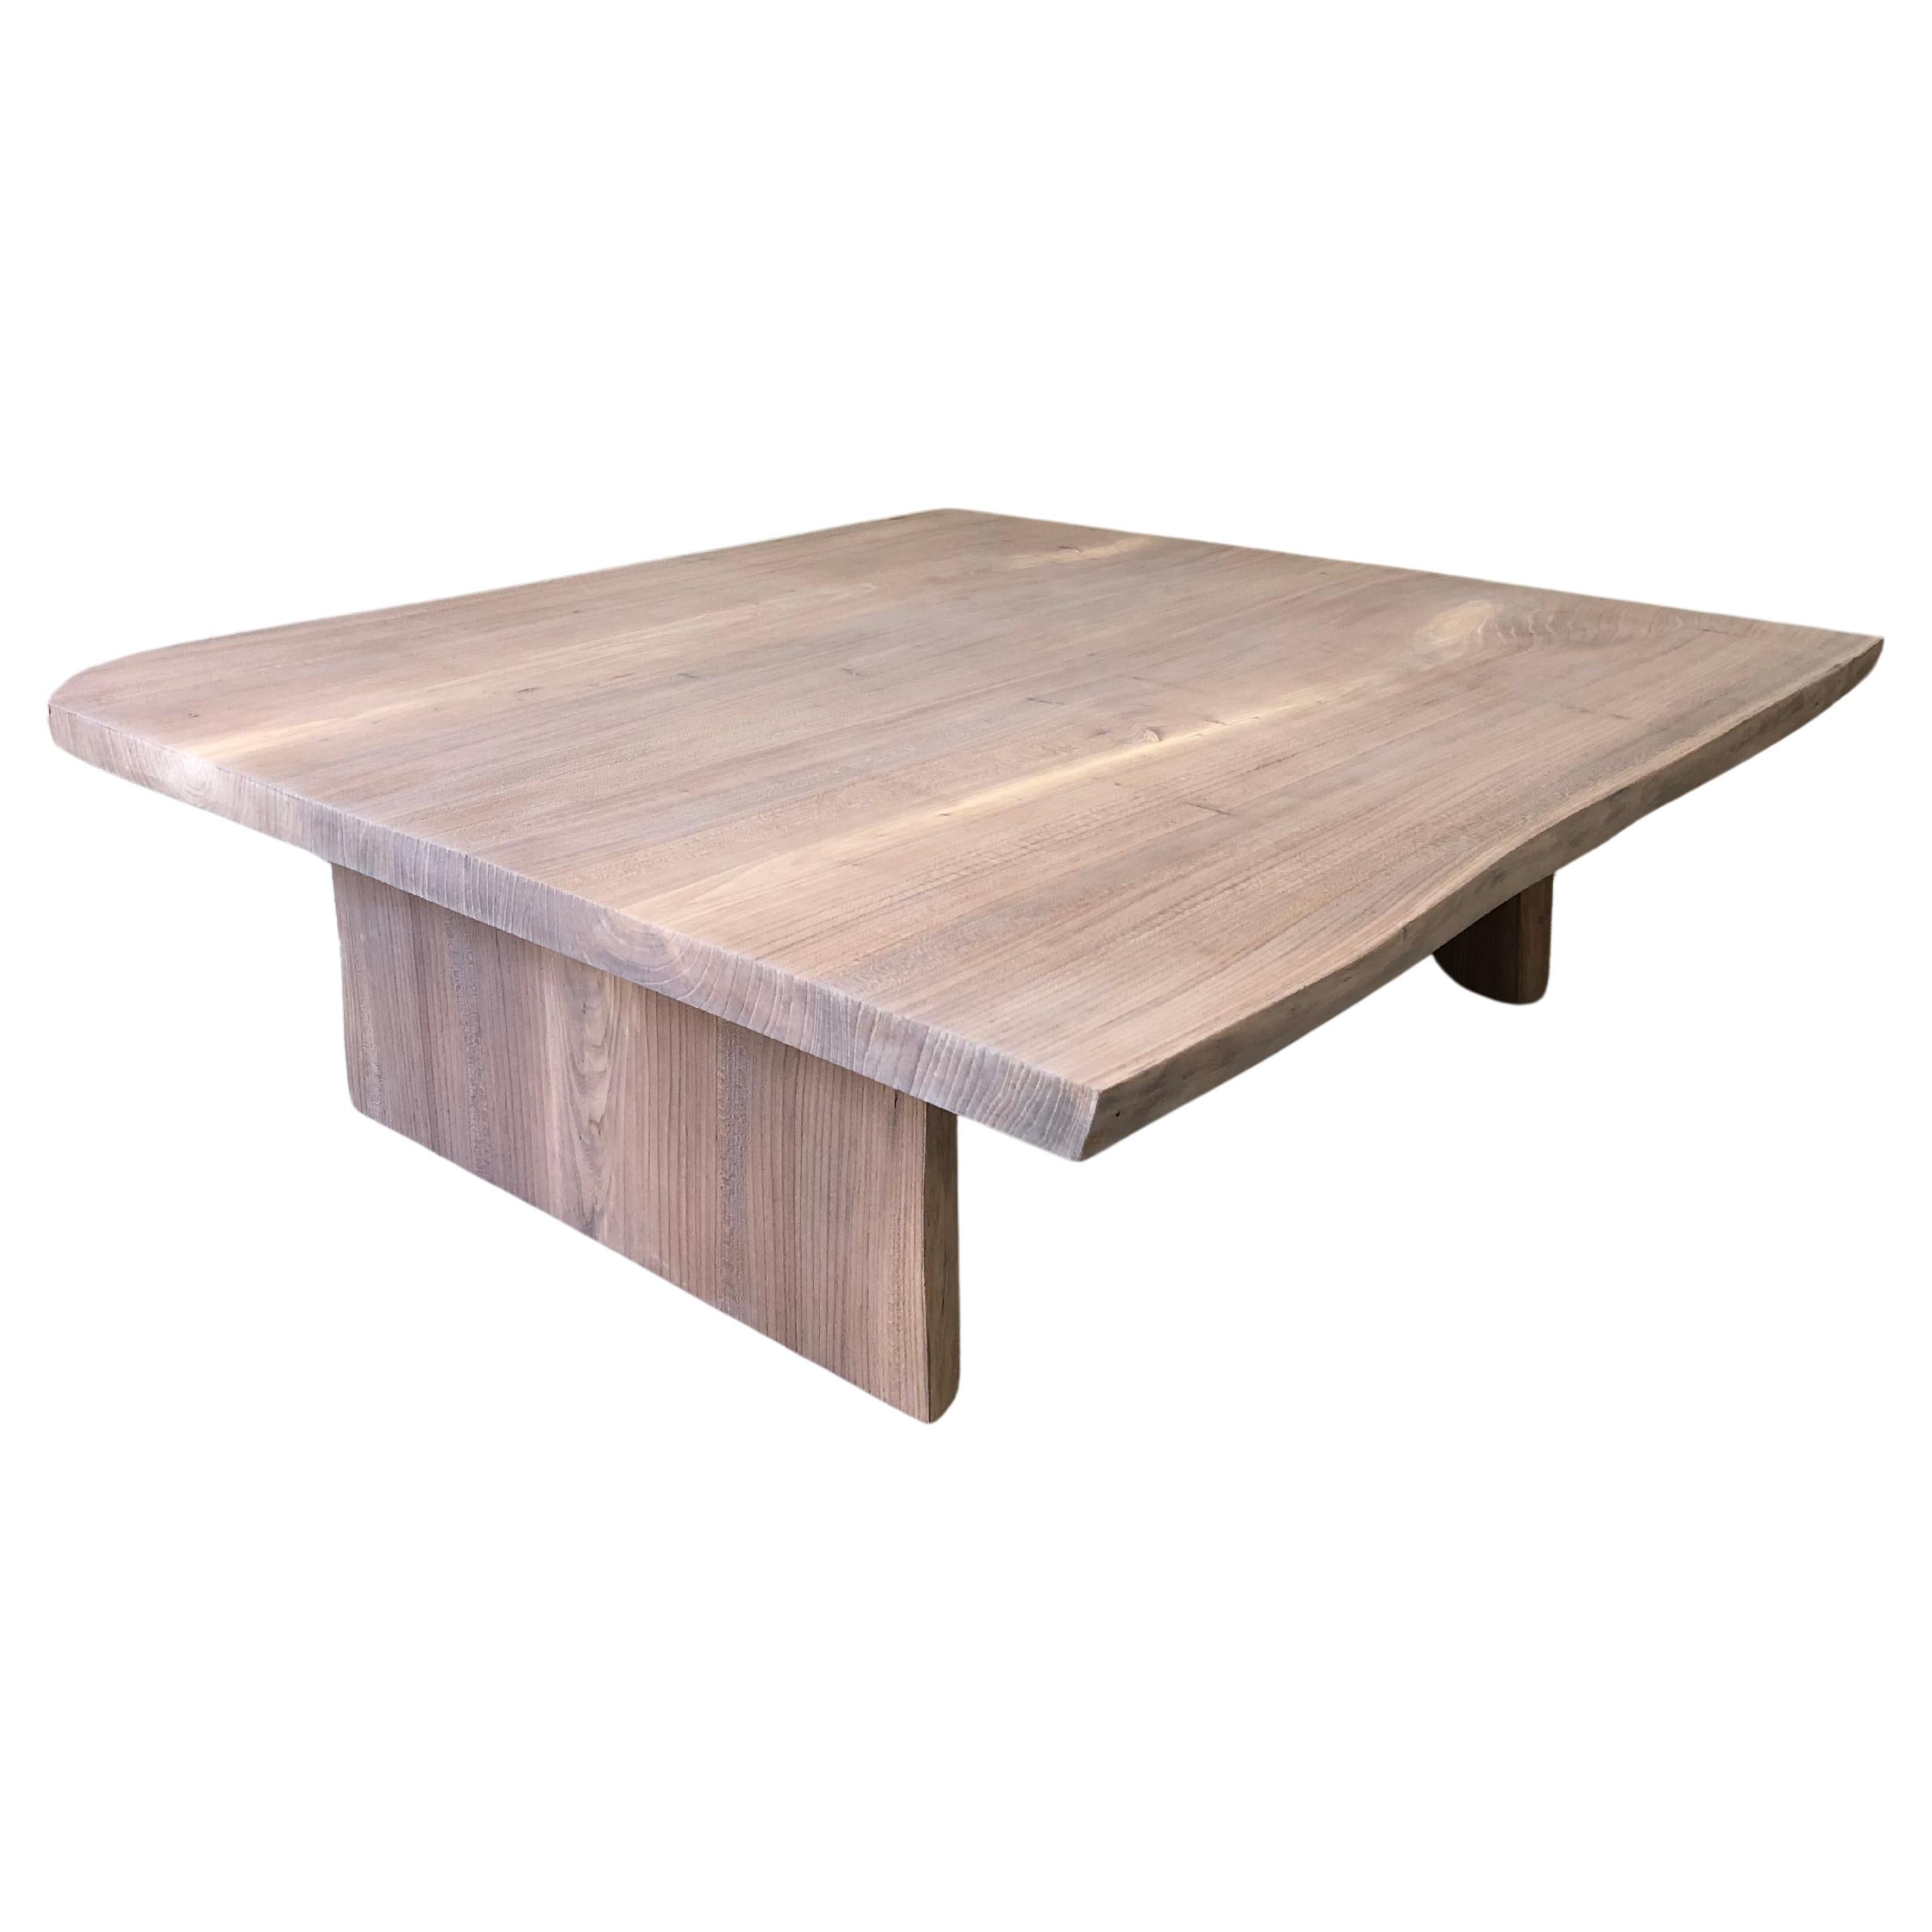 Live edge book match coffee table For Sale